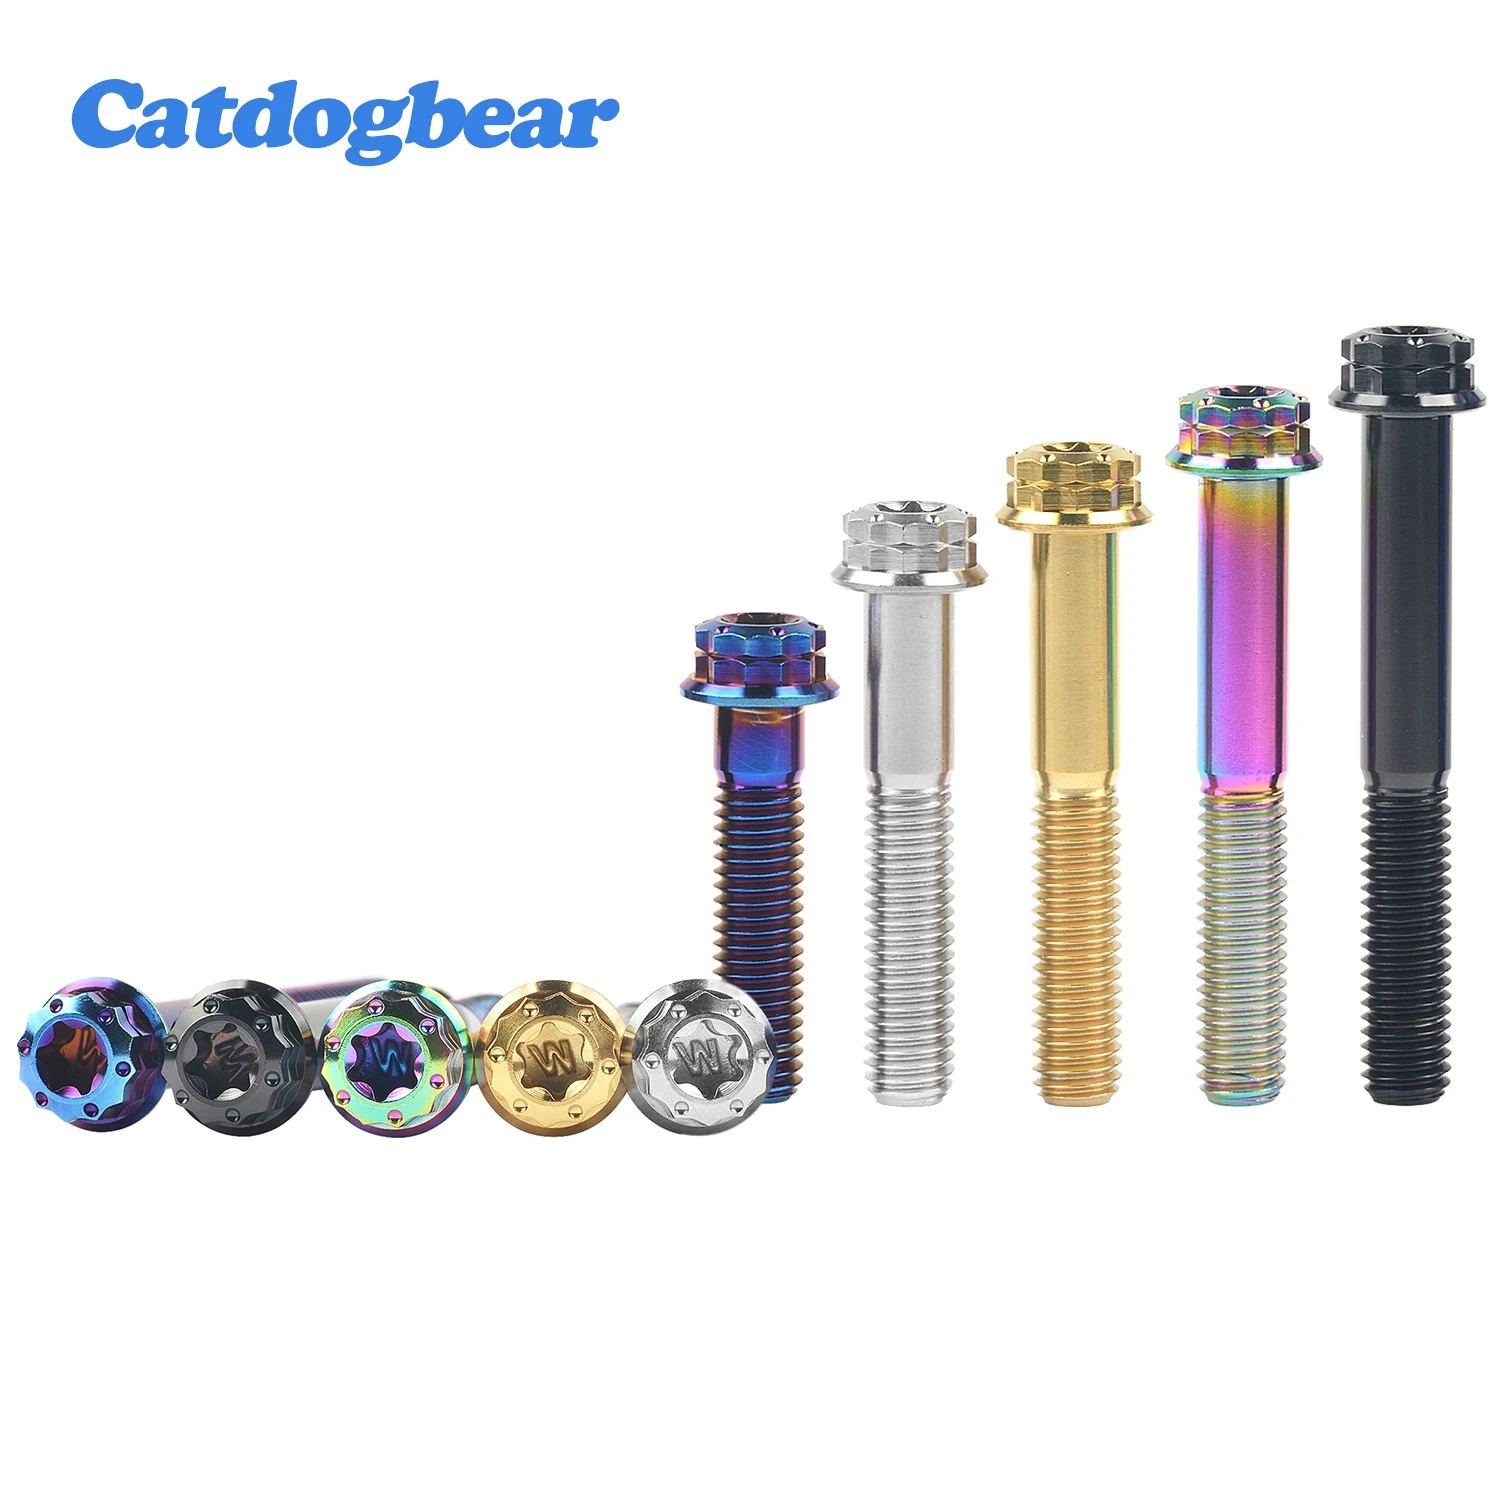 

Catdogbear Titanium Flange 12 Points Bolt M10x25 30 35 40 45 50 55 60 65 70mm T50 Torx Pitch1.25/1.5mm for Cars and Motorcycles